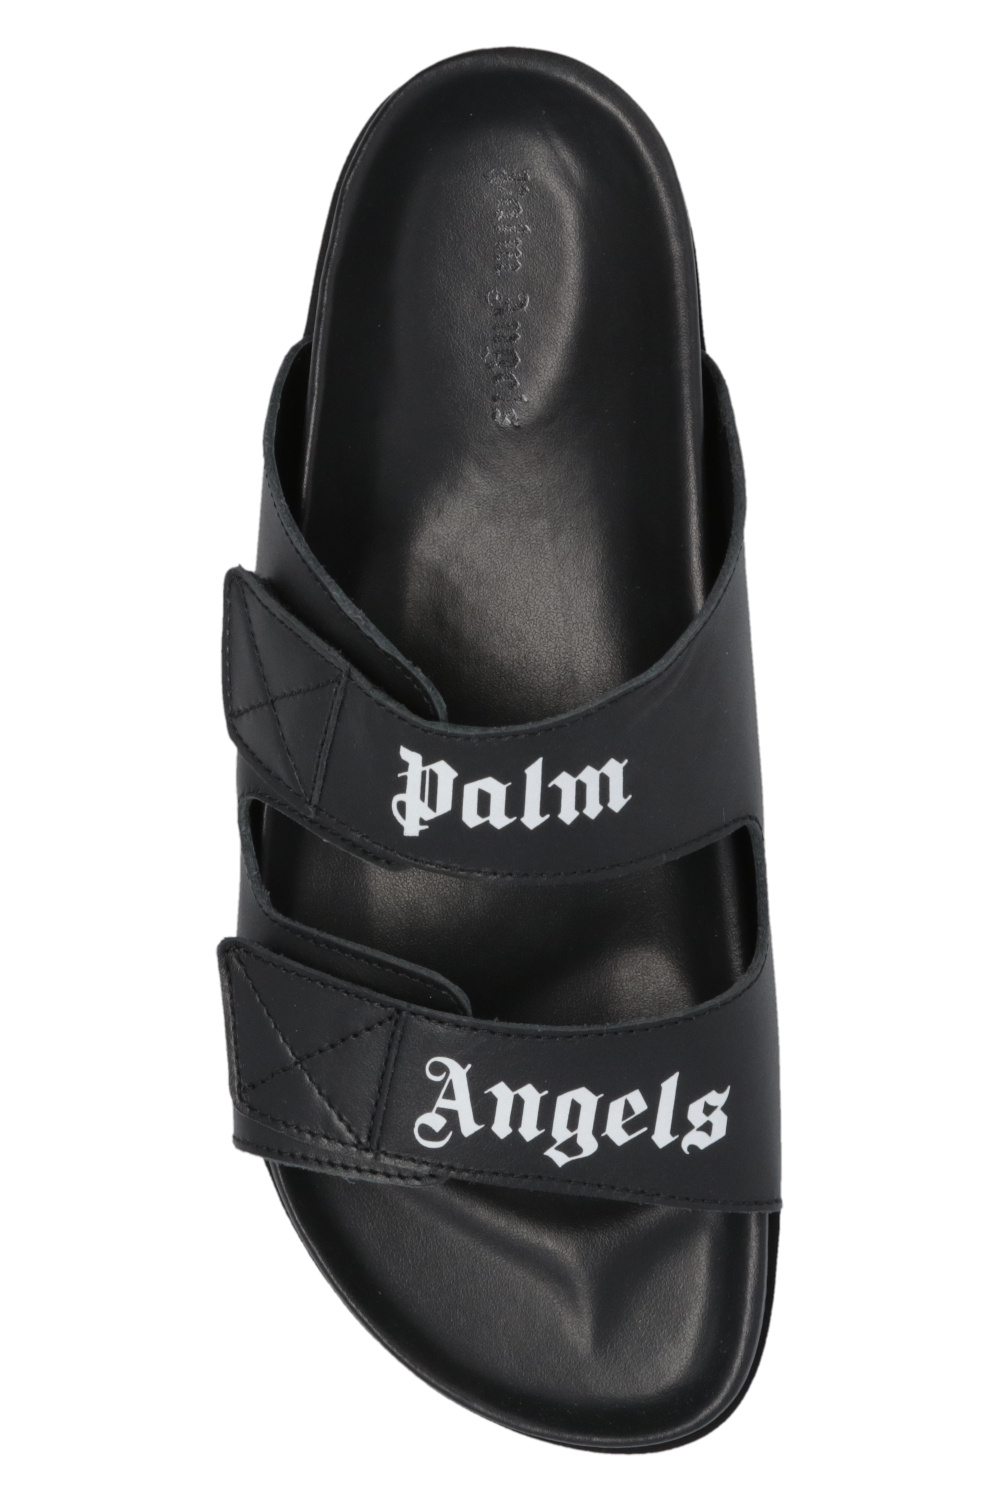 Palm Angels Sole height: 2cm